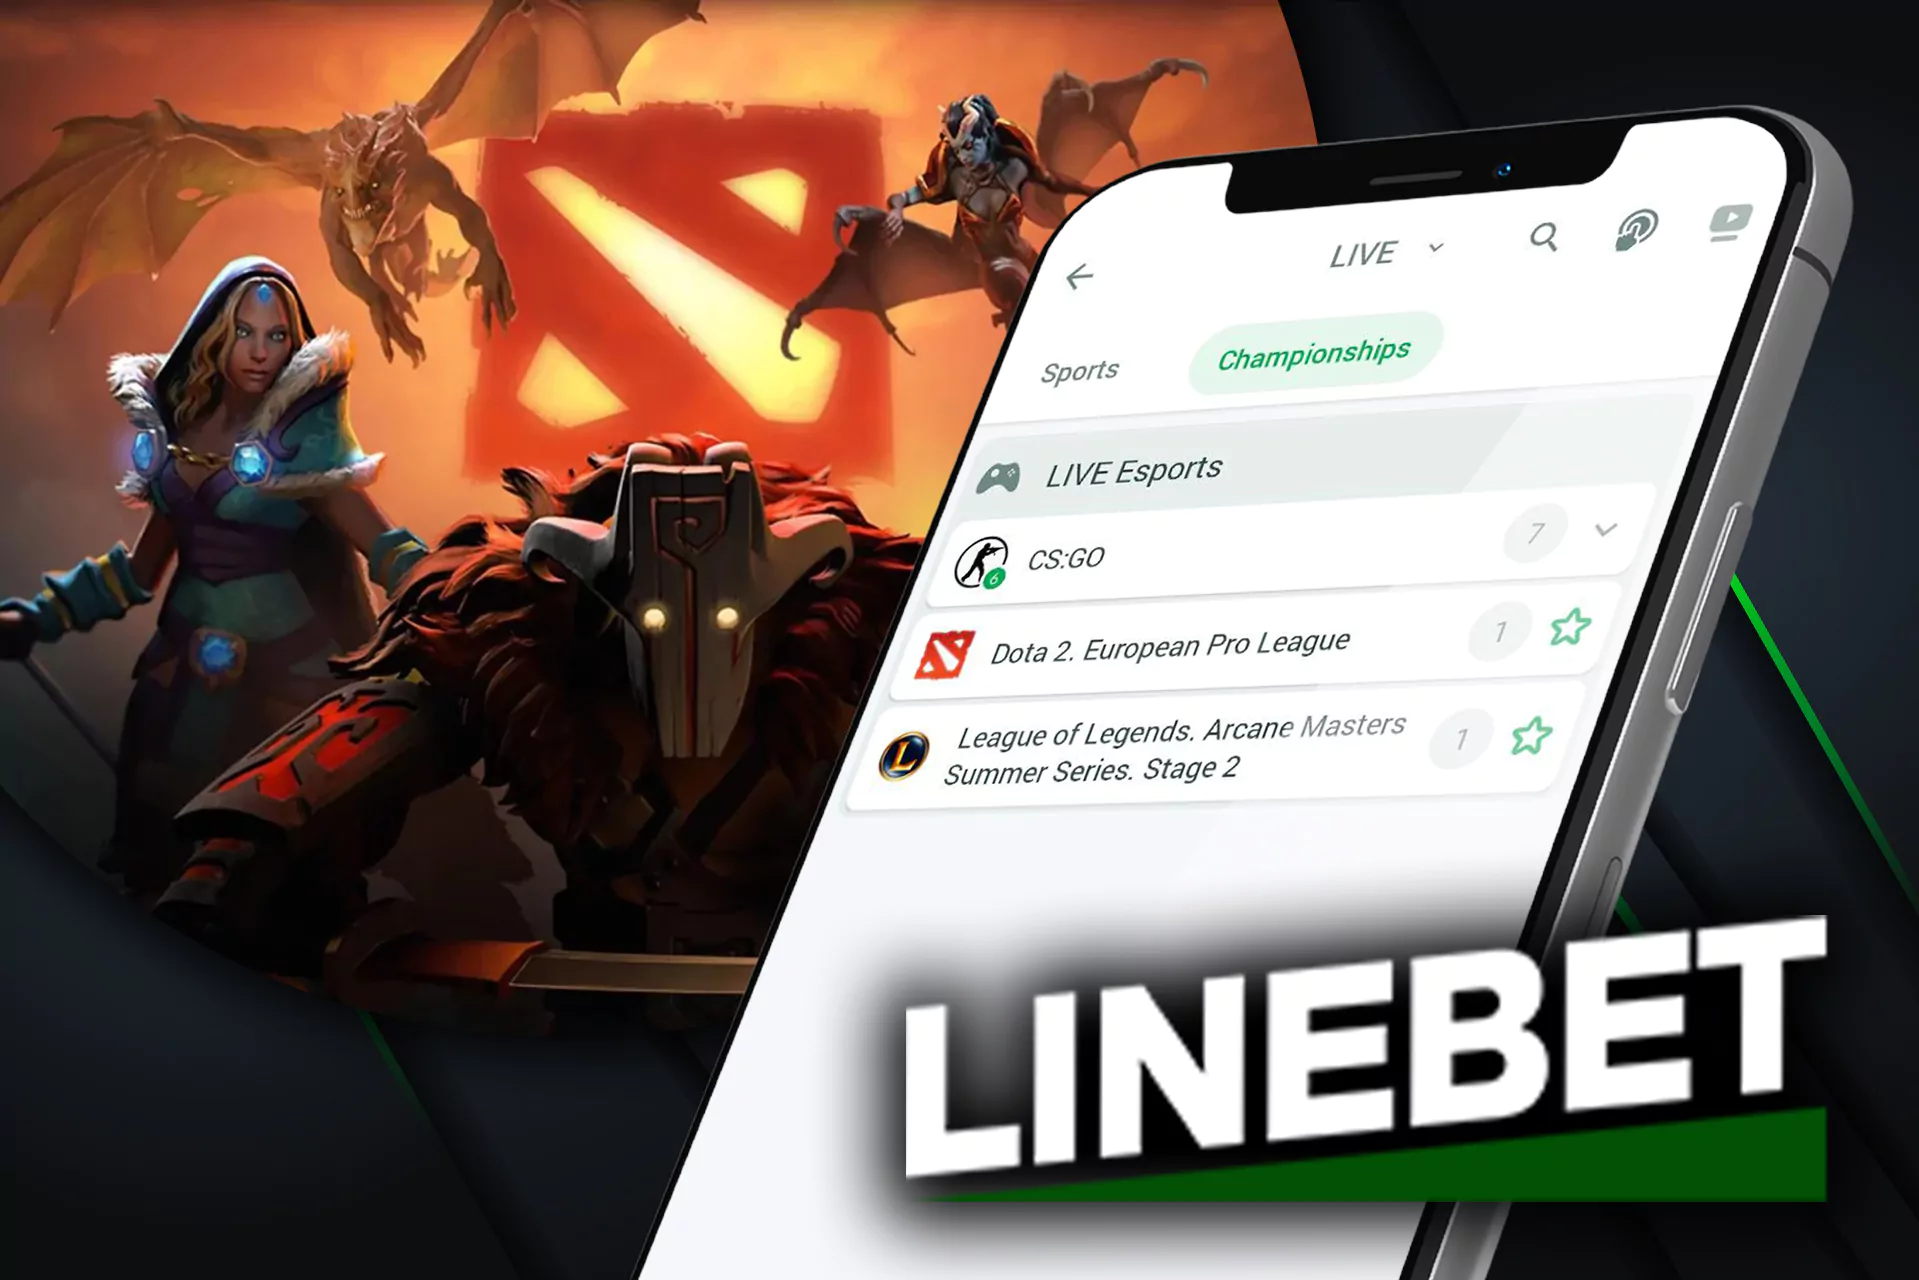 The Linebet app allows placing bets on esports as well.